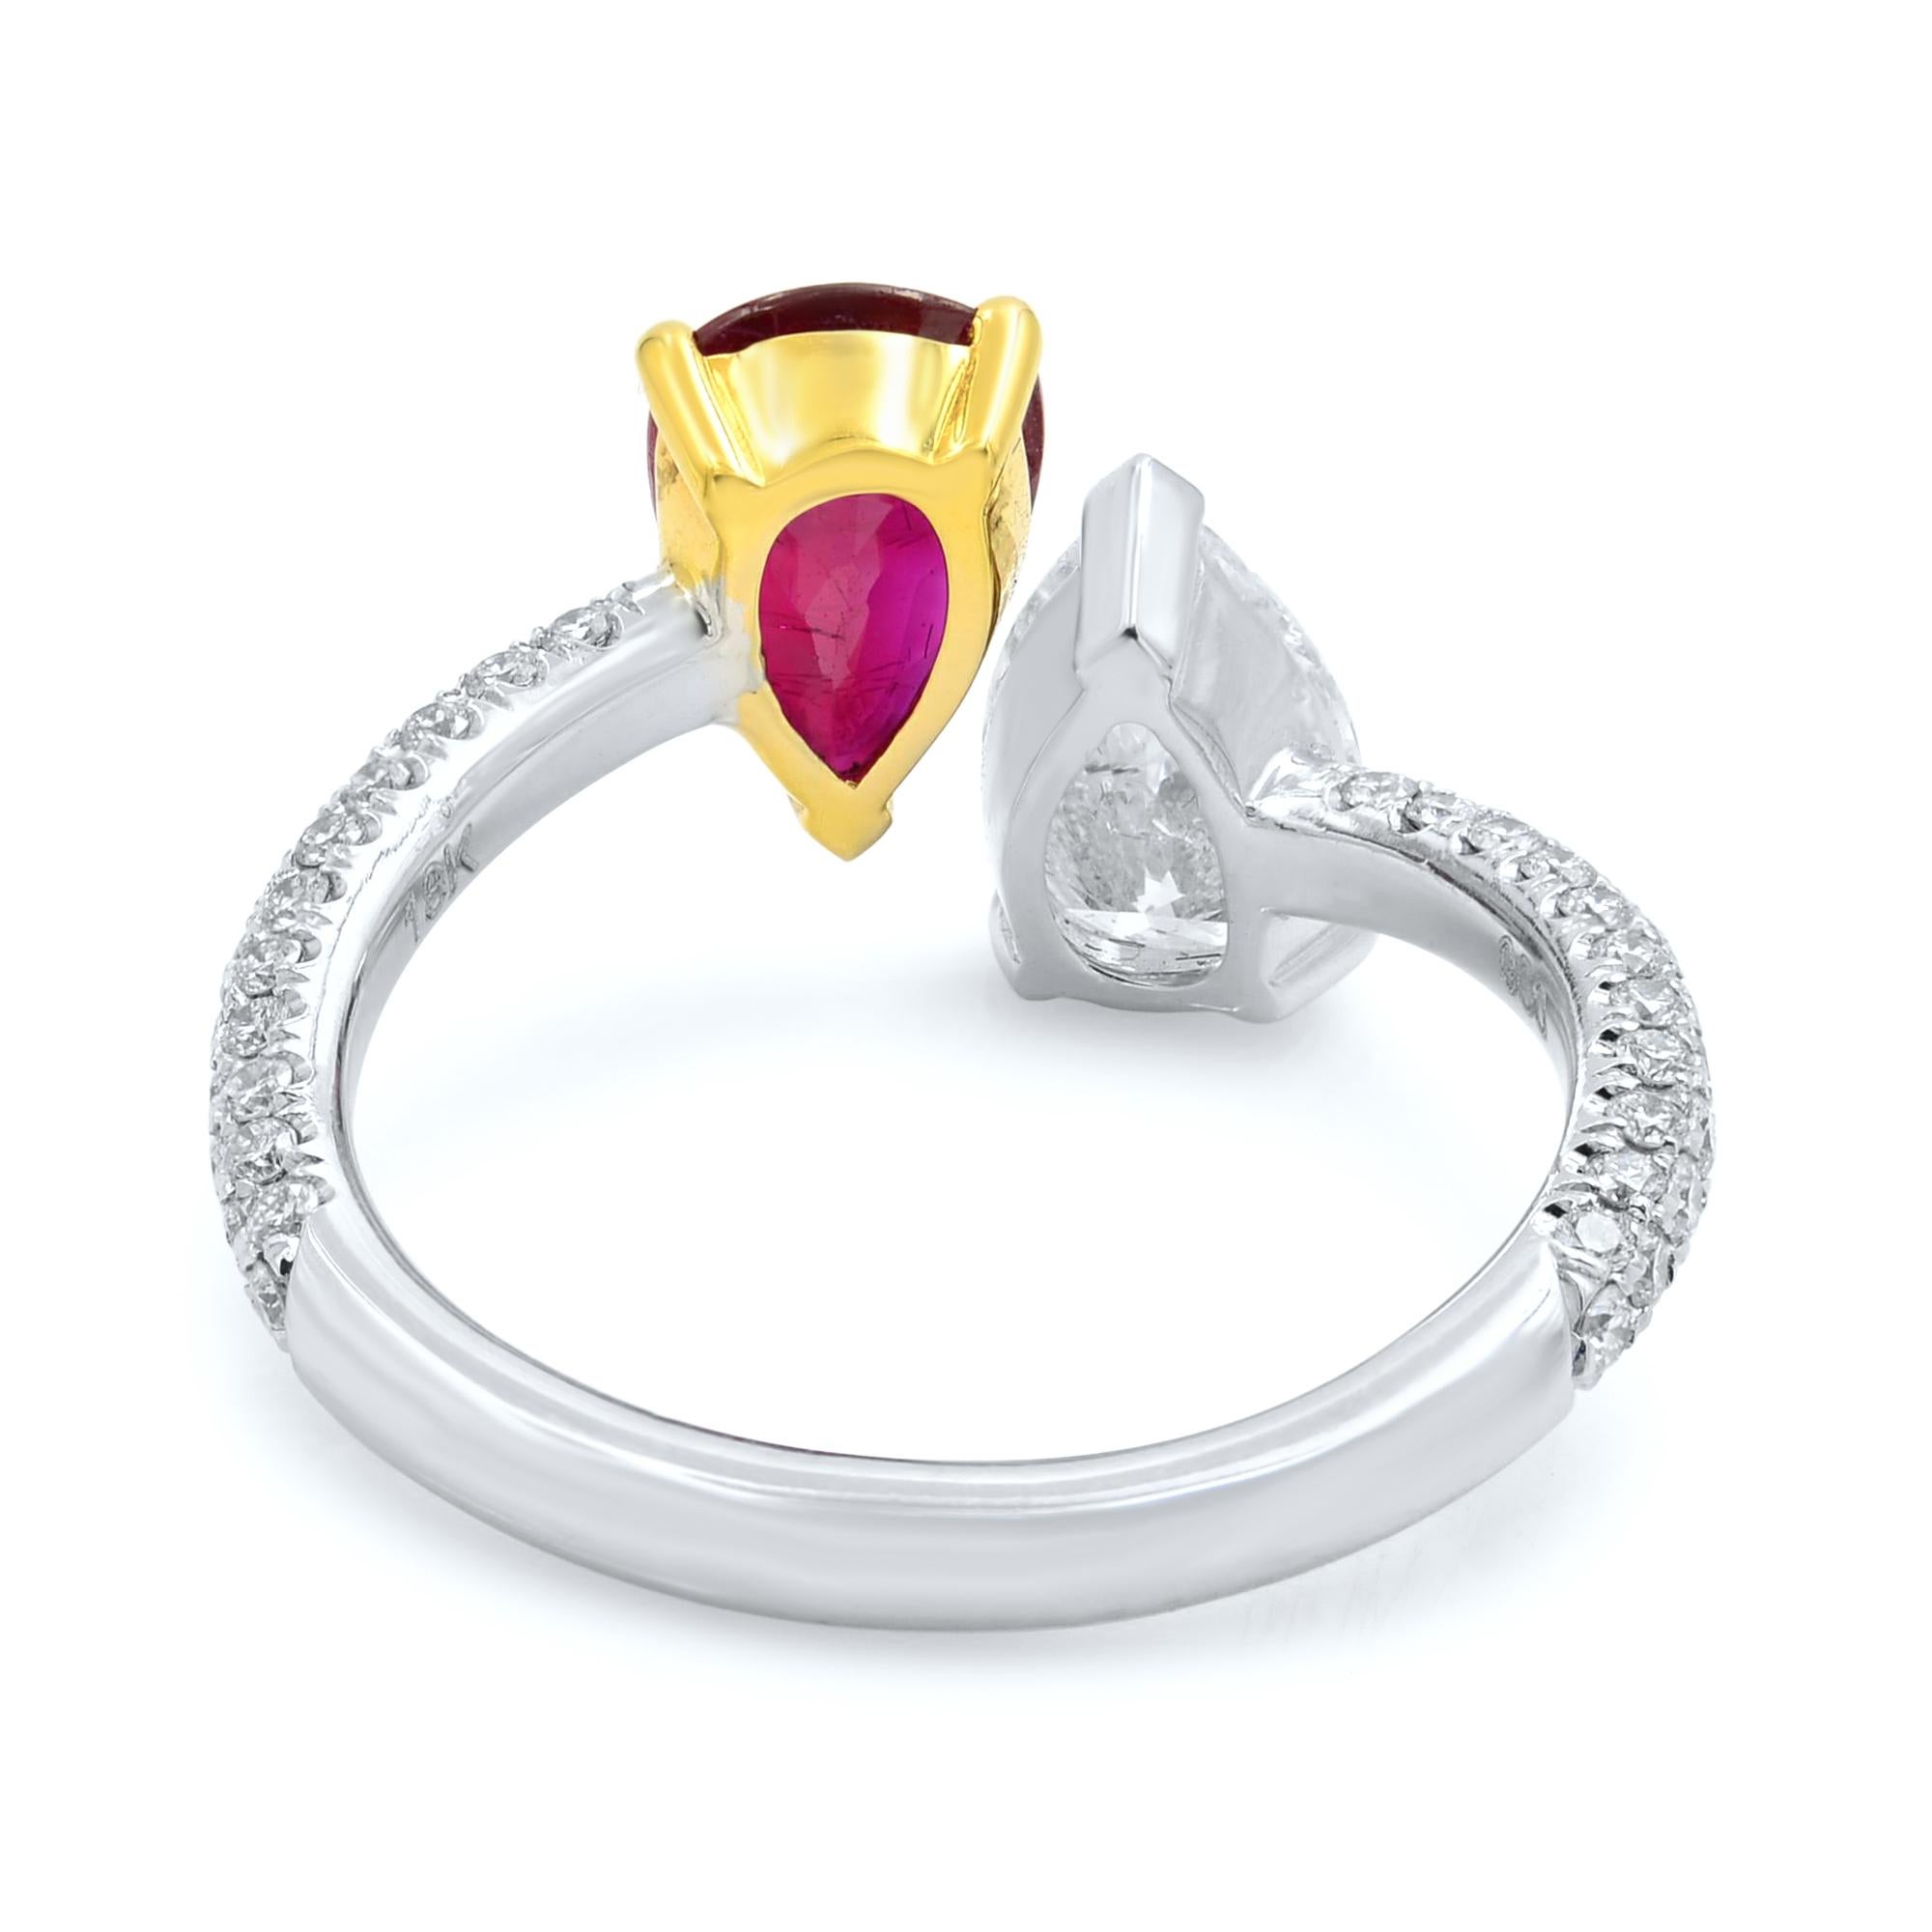 Double pear shaped diamond and ruby ring crafted in platinum with micro pave diamonds on the shank. Inspired by popular Gemini collection of the UK bespoke jewelry house we are happy to have this ring in our collection. For true ruby lovers, this